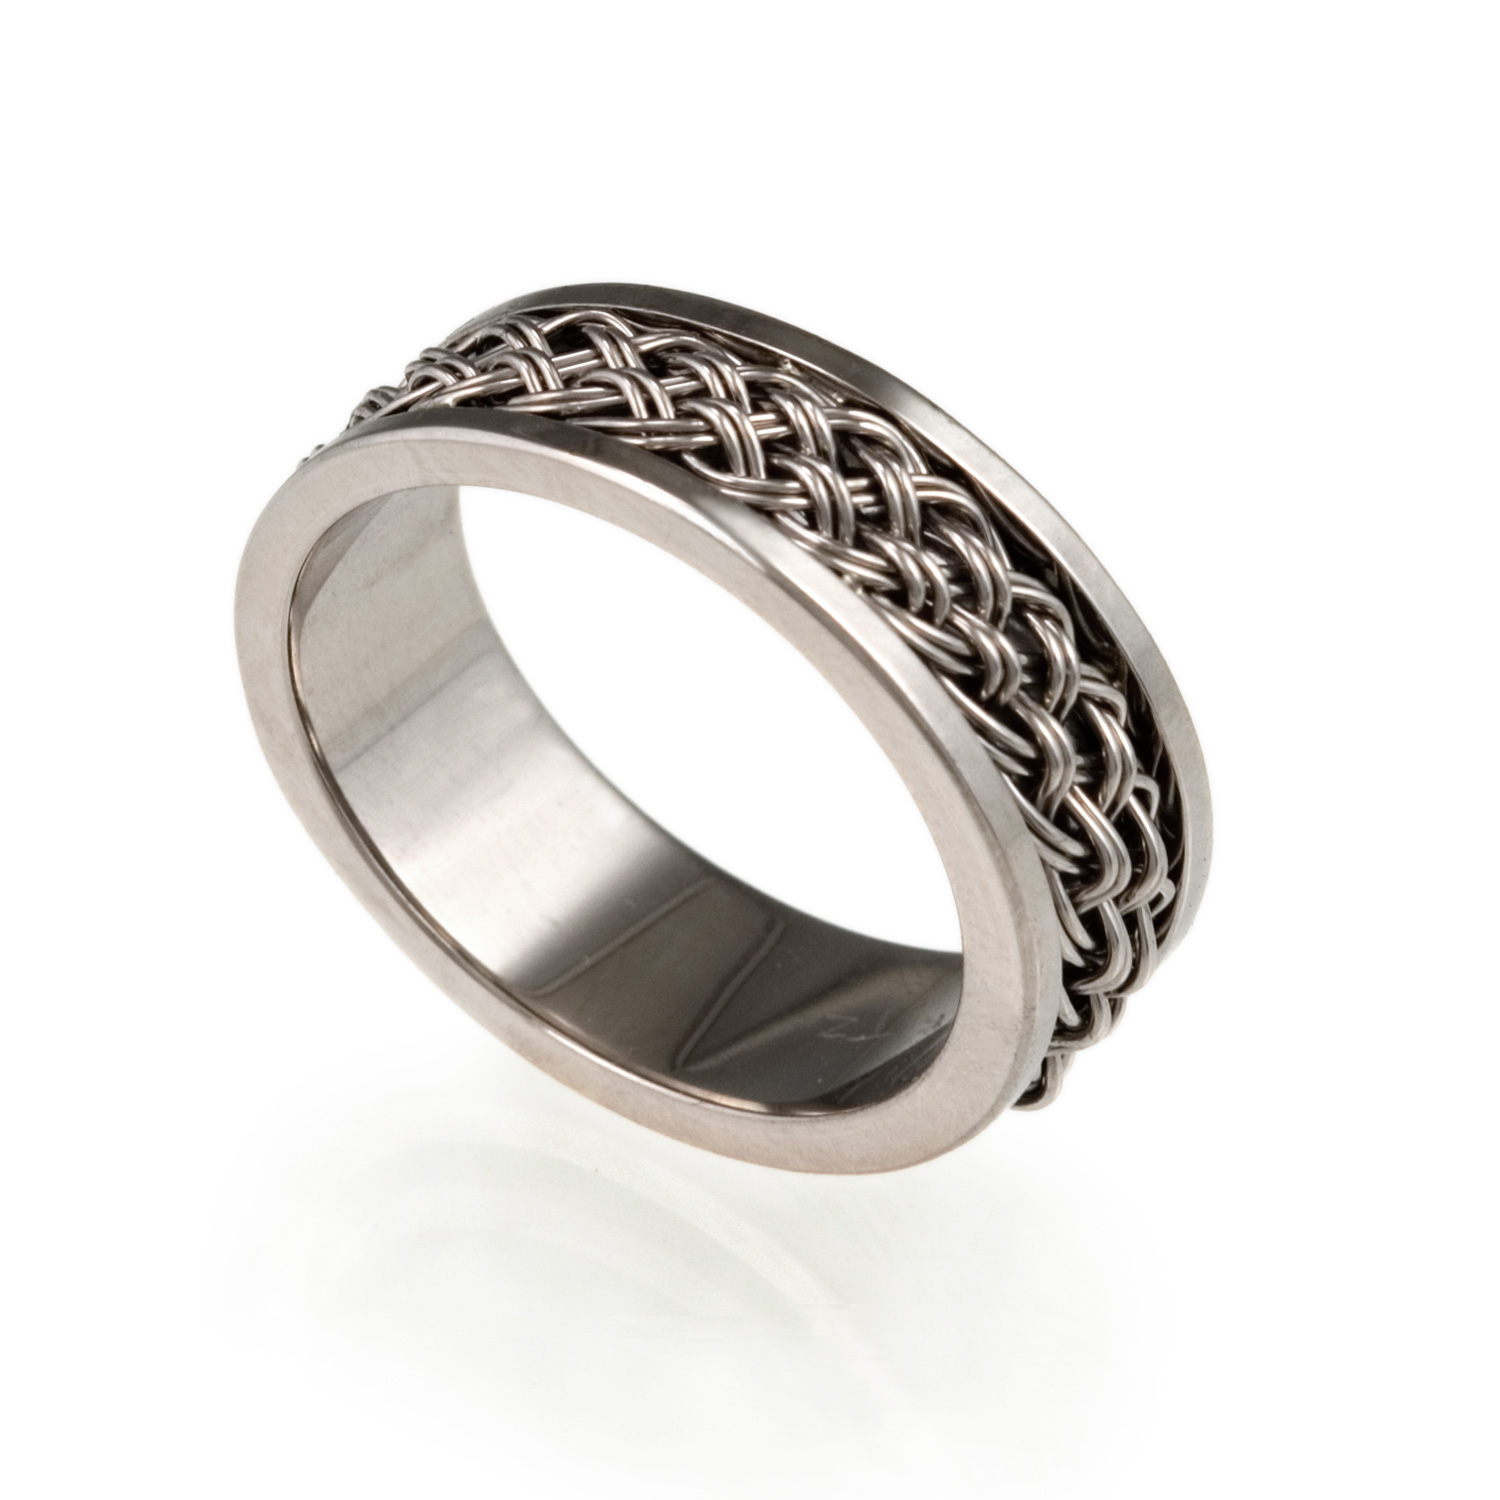 Inset Weave Ring by Tamberlaine